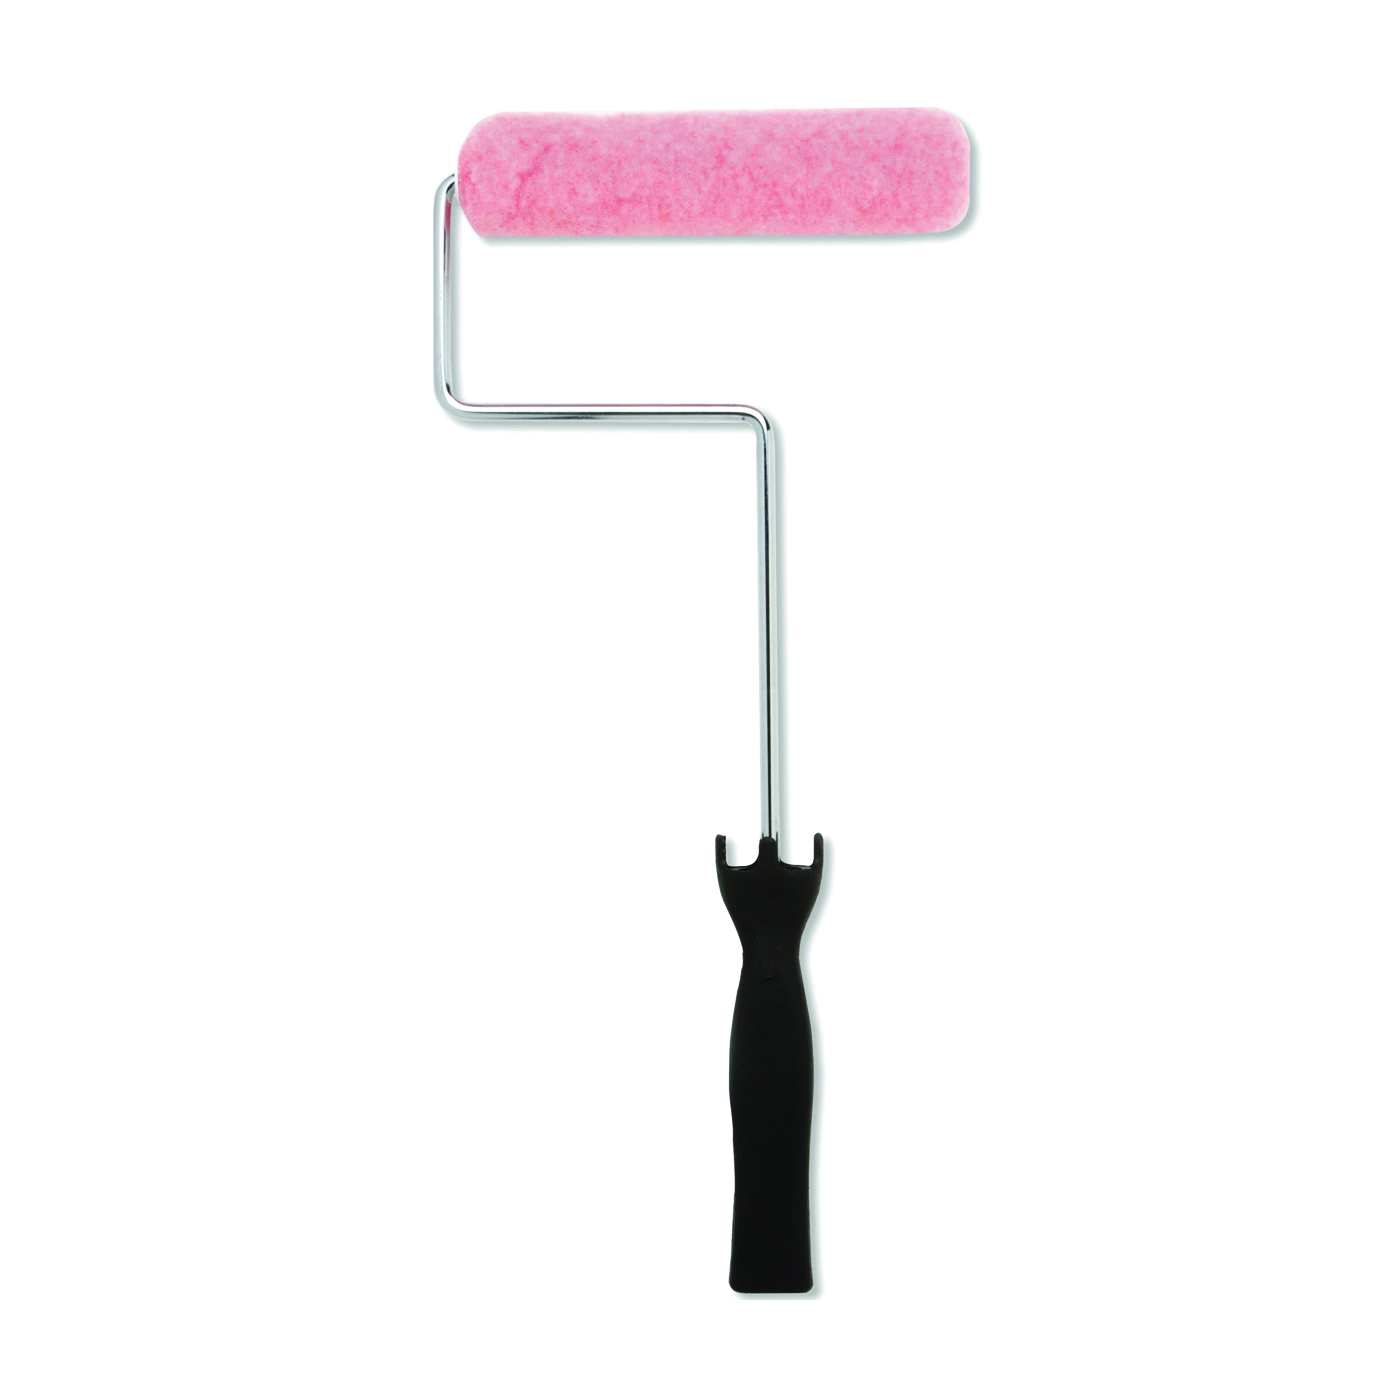 44246 Mini Roller, 1/2 in Nap, Polyester Cover, Plastic Handle, Whizz Roller System Mini Roller Handle